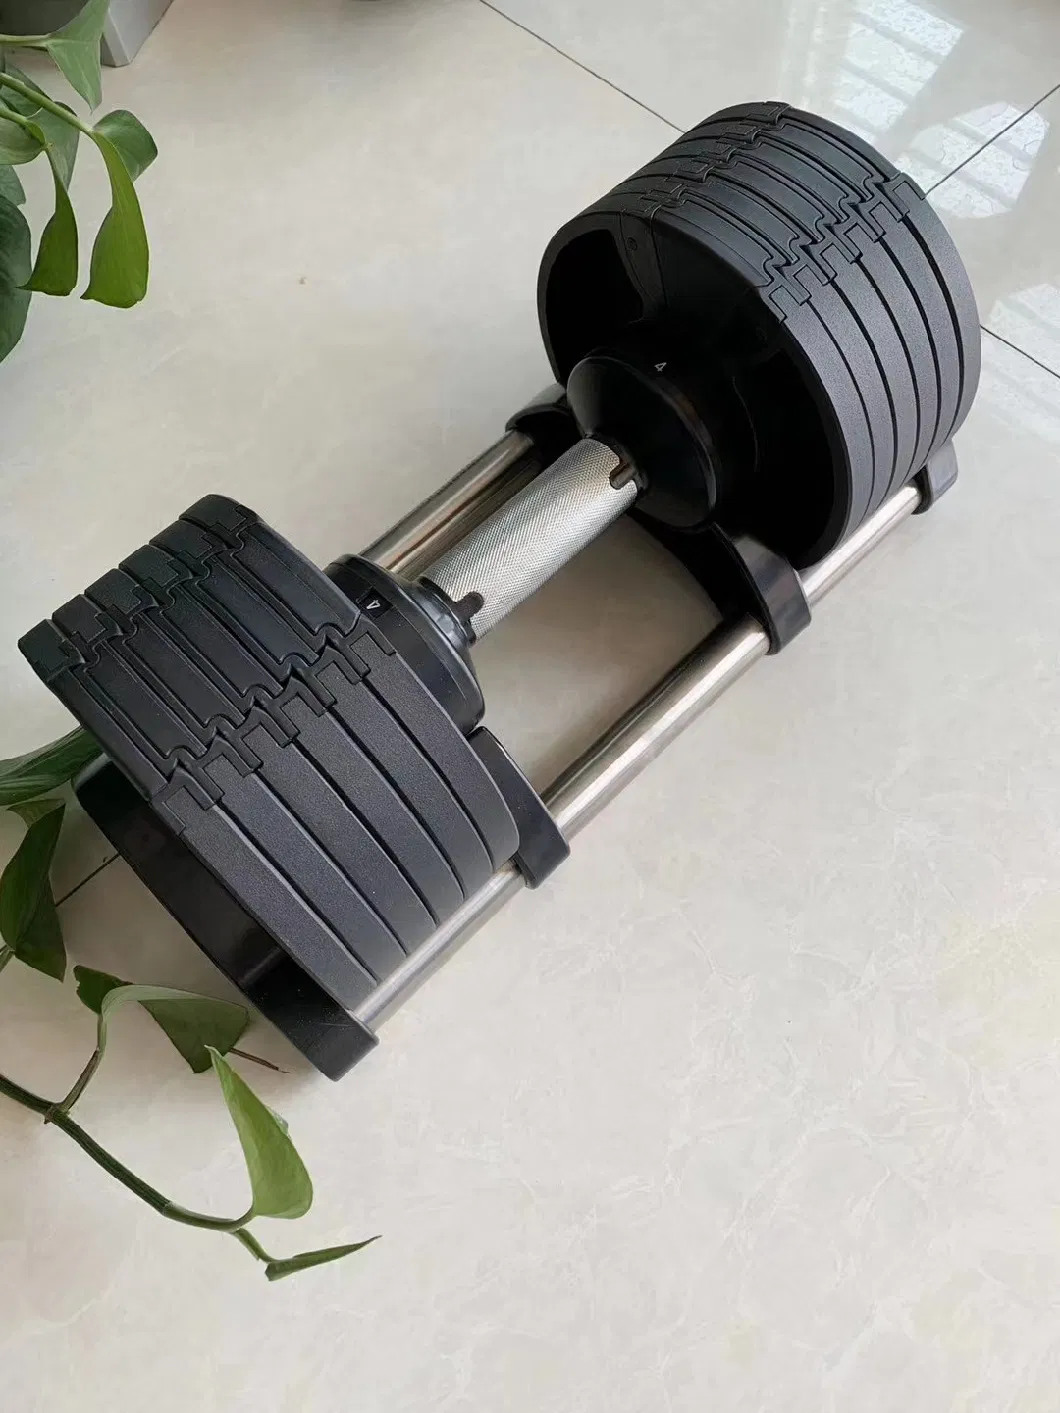 Hot Sale Gym Free Weights Weight Lifting Cast Iron Adjustable Dumbbells 20kg/45lb with Color Available